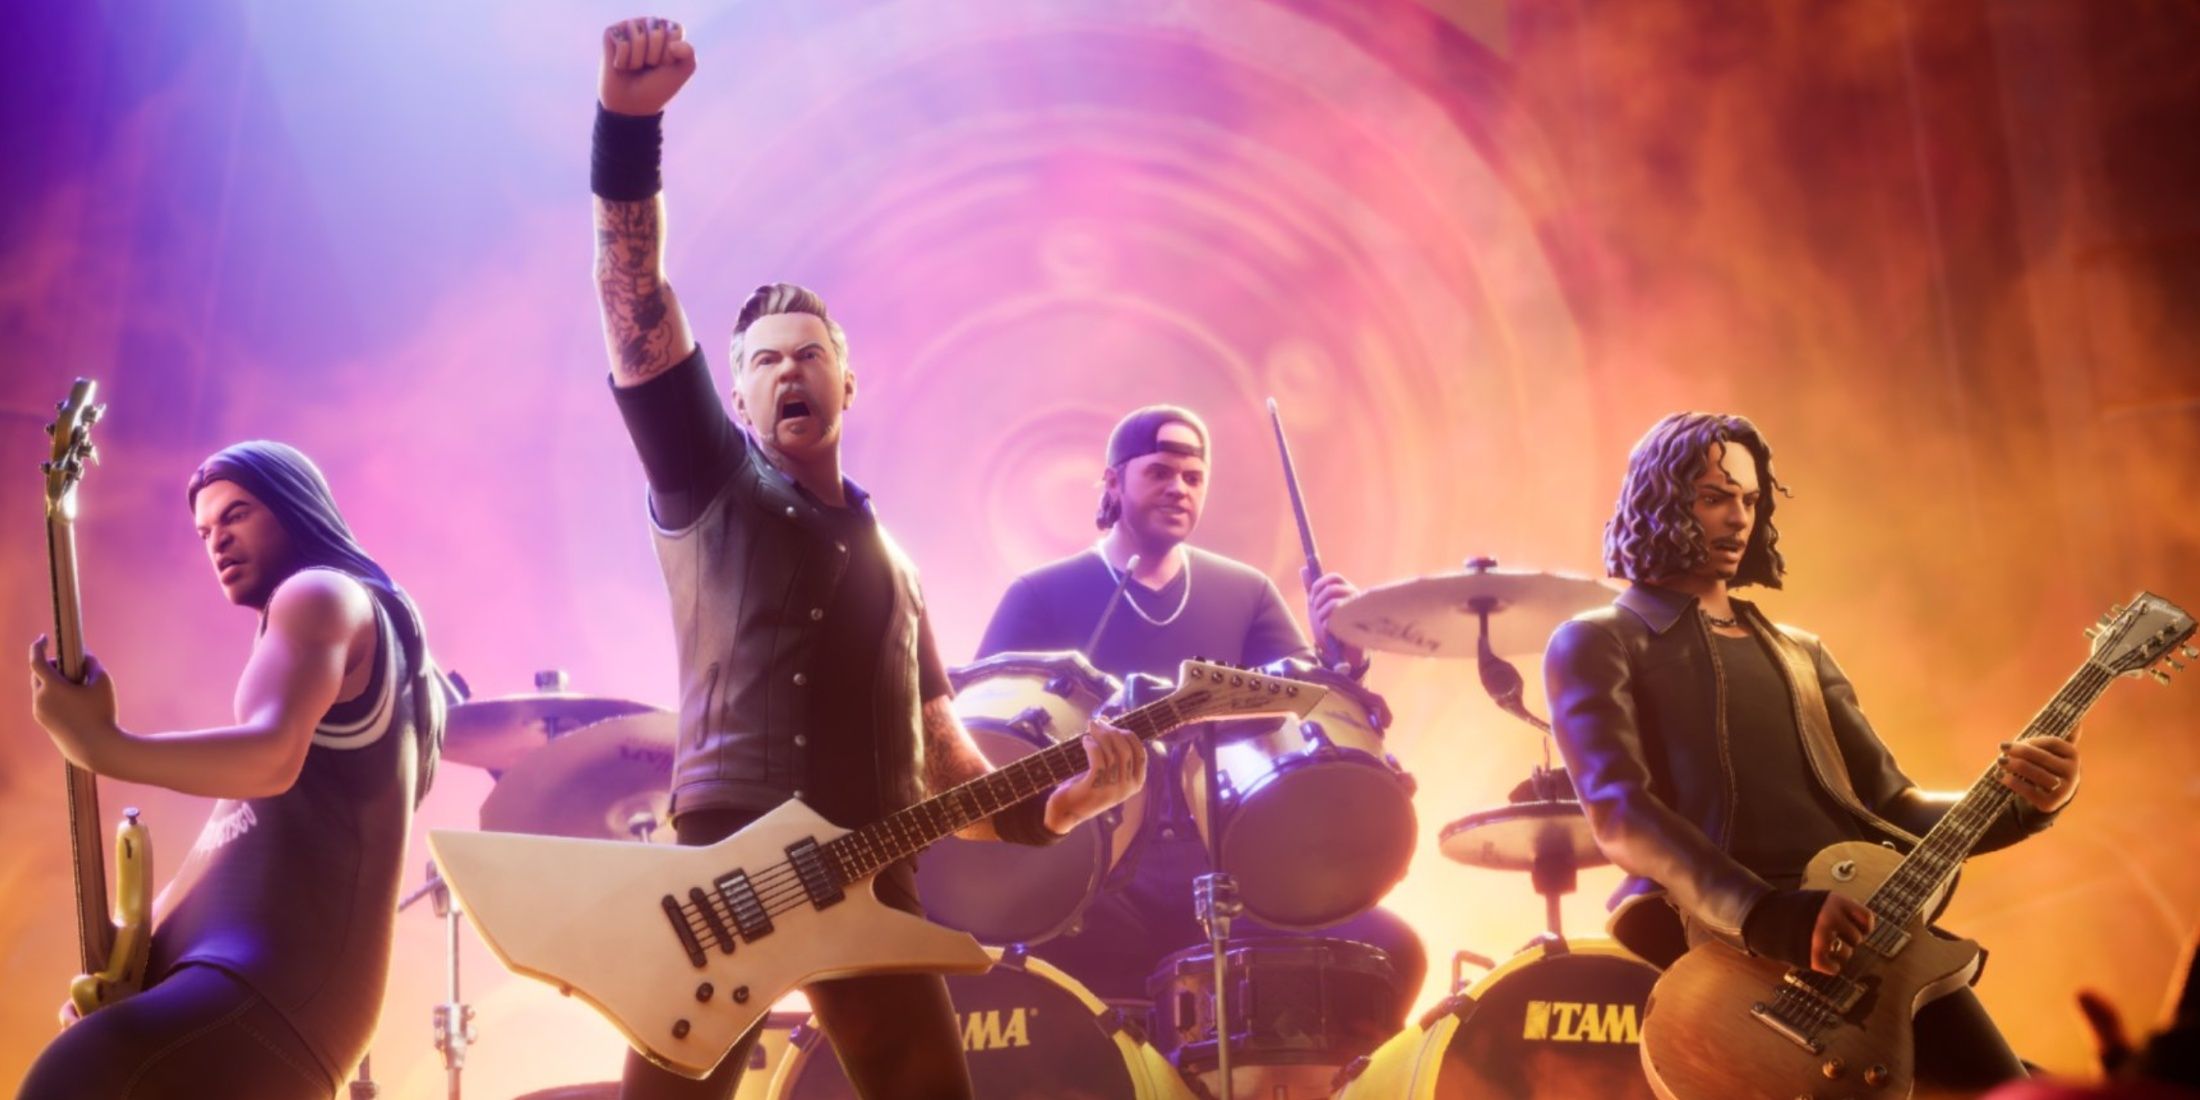 metallica band as fortnite characters singing on stage